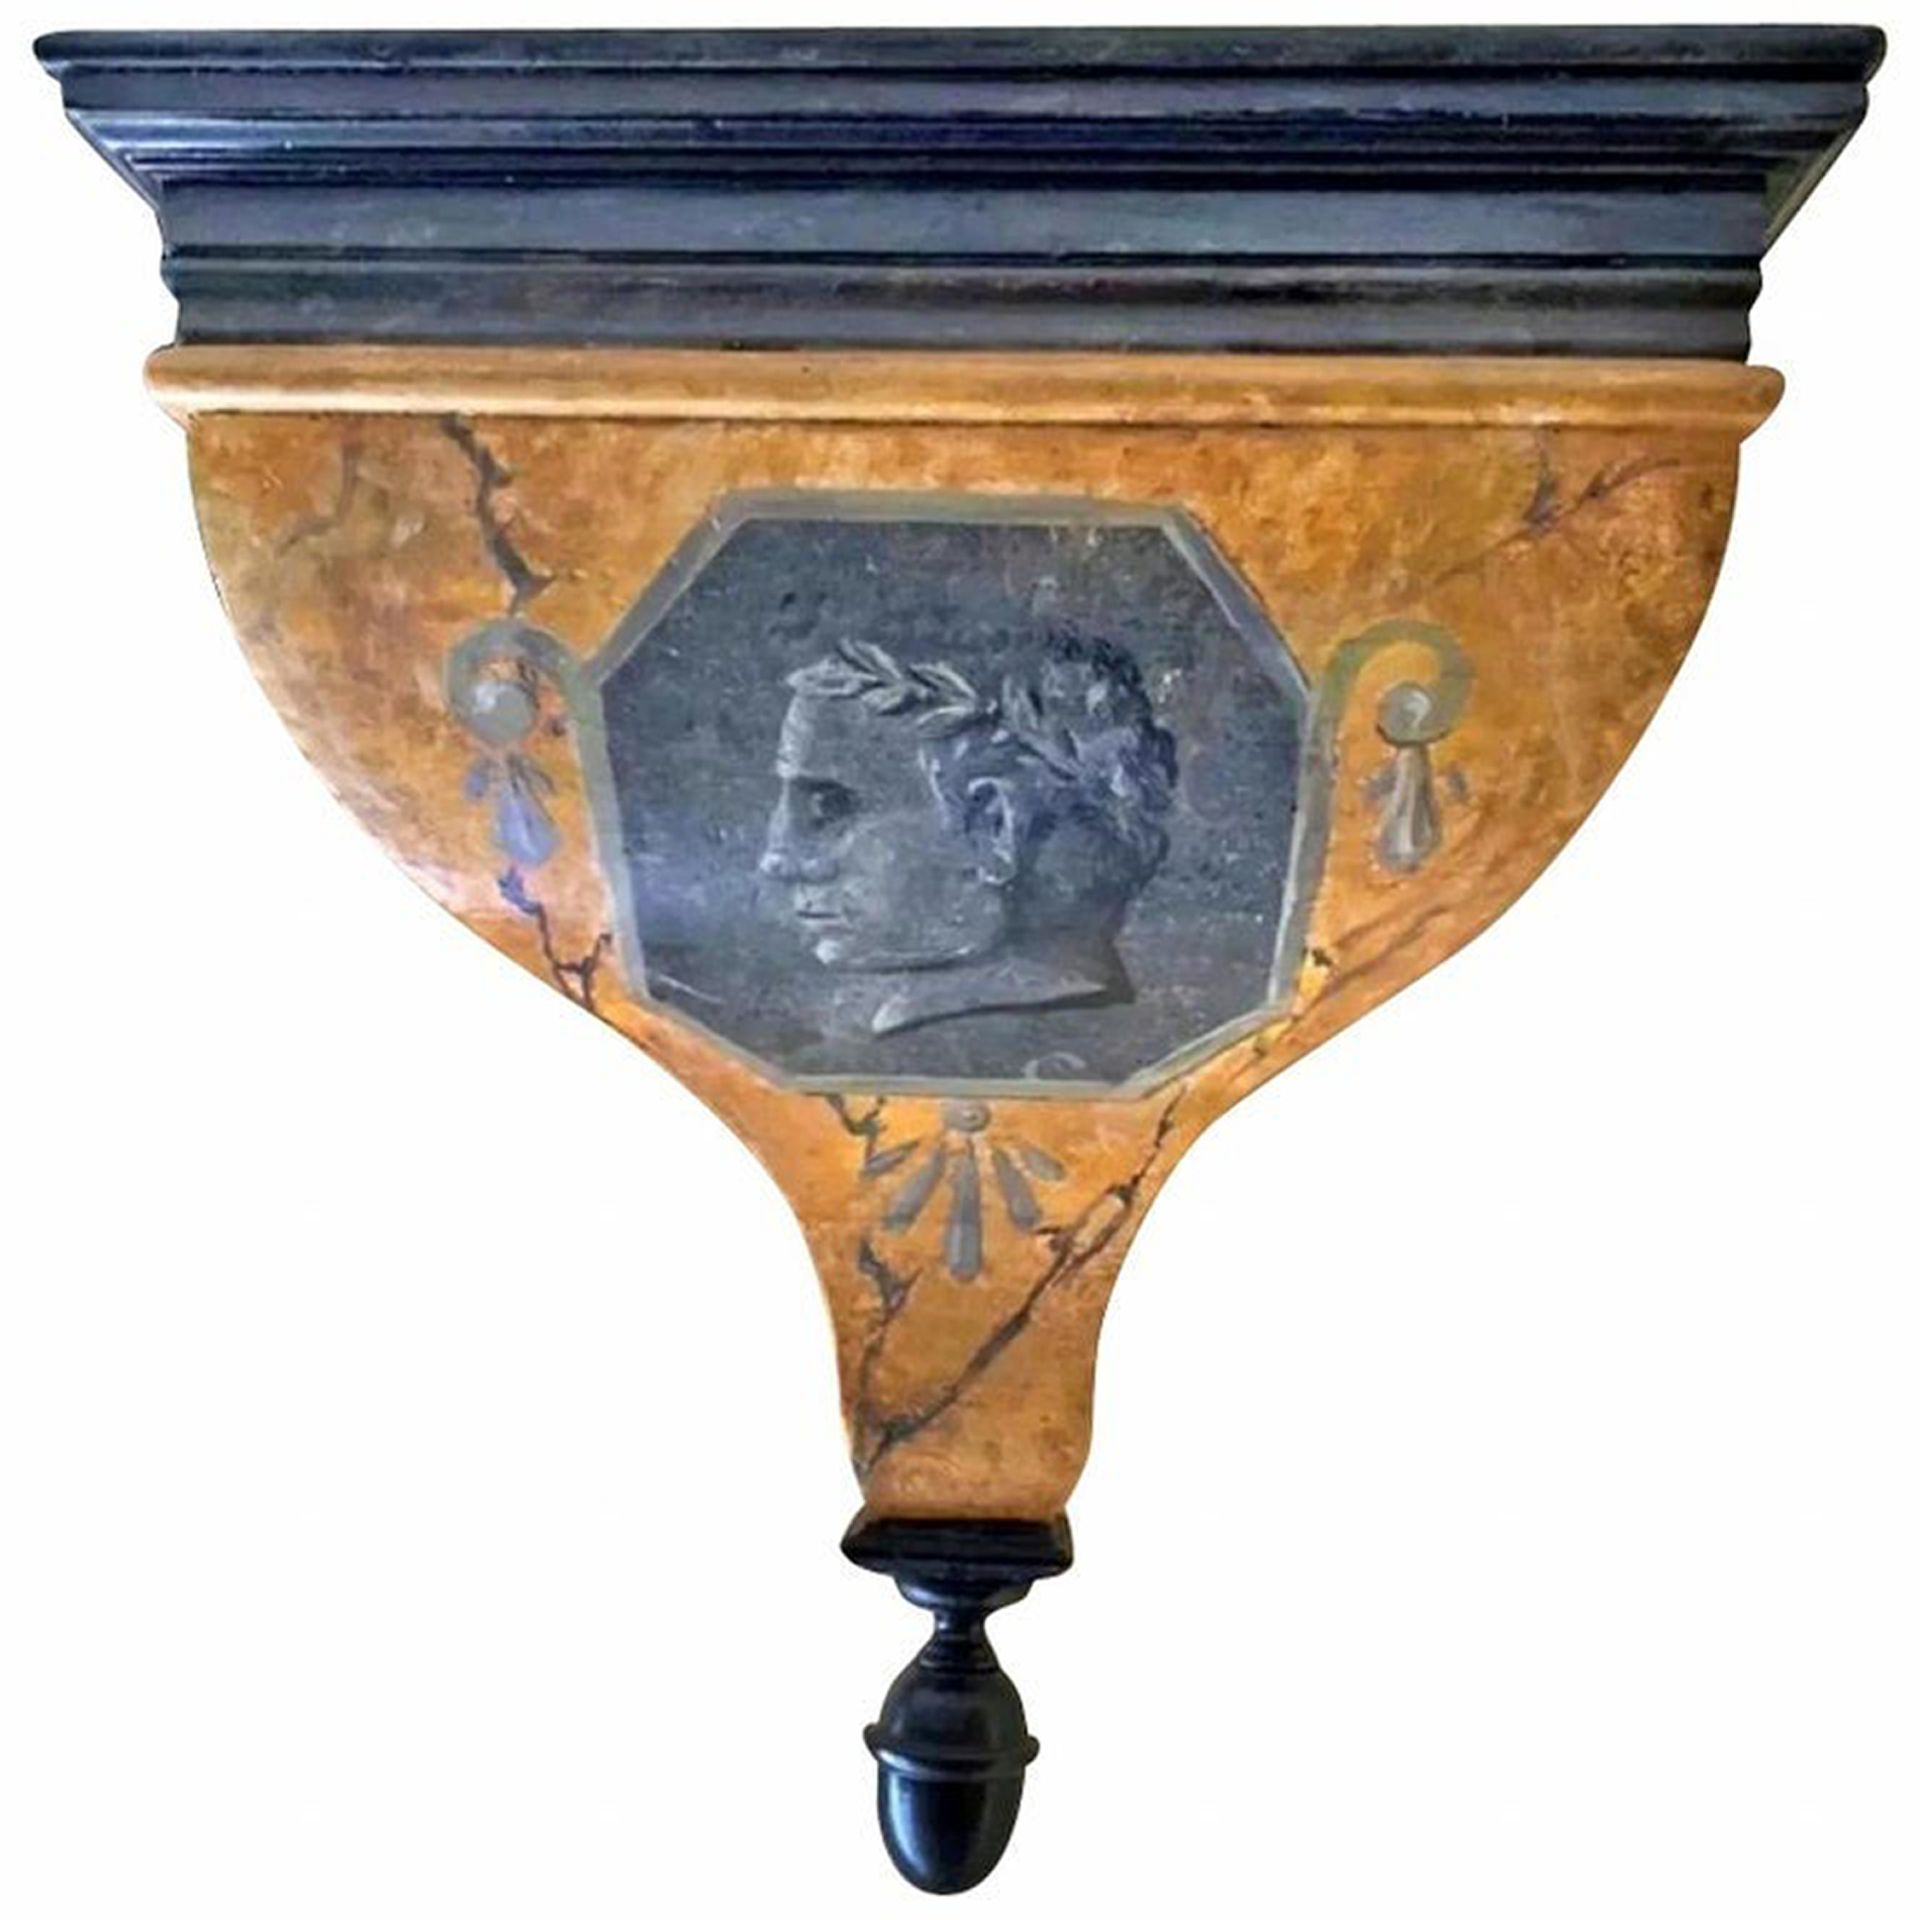 Italian shelf with effigy of emperor, Neoclassical style, 20th century